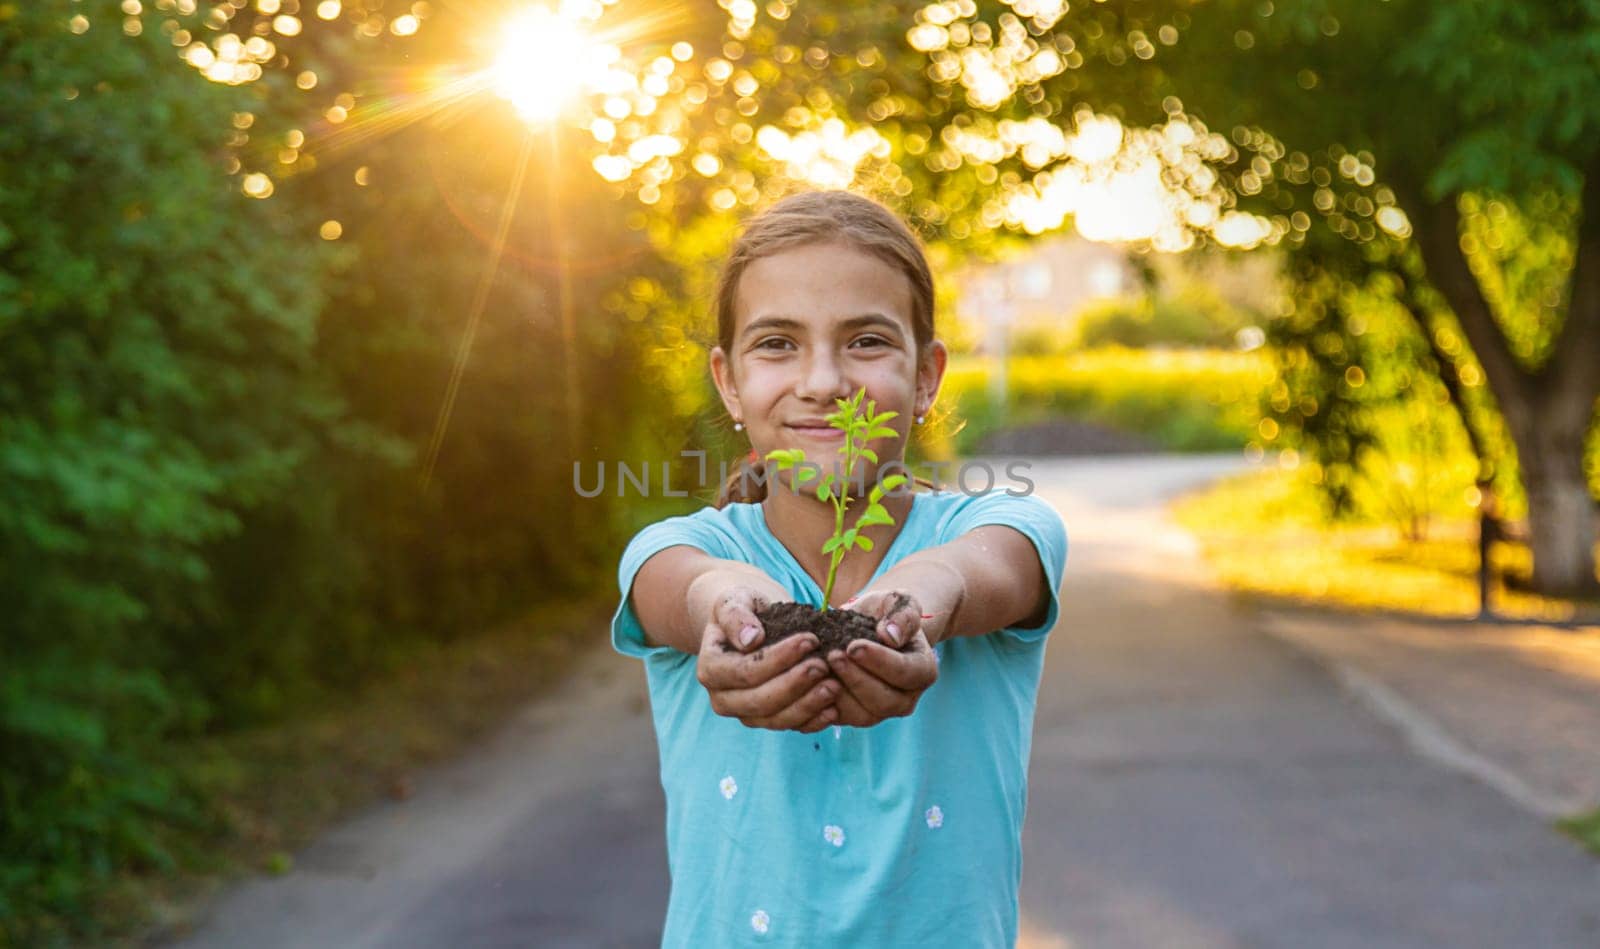 The child holds a plant in his hands. Selective focus. Kid.